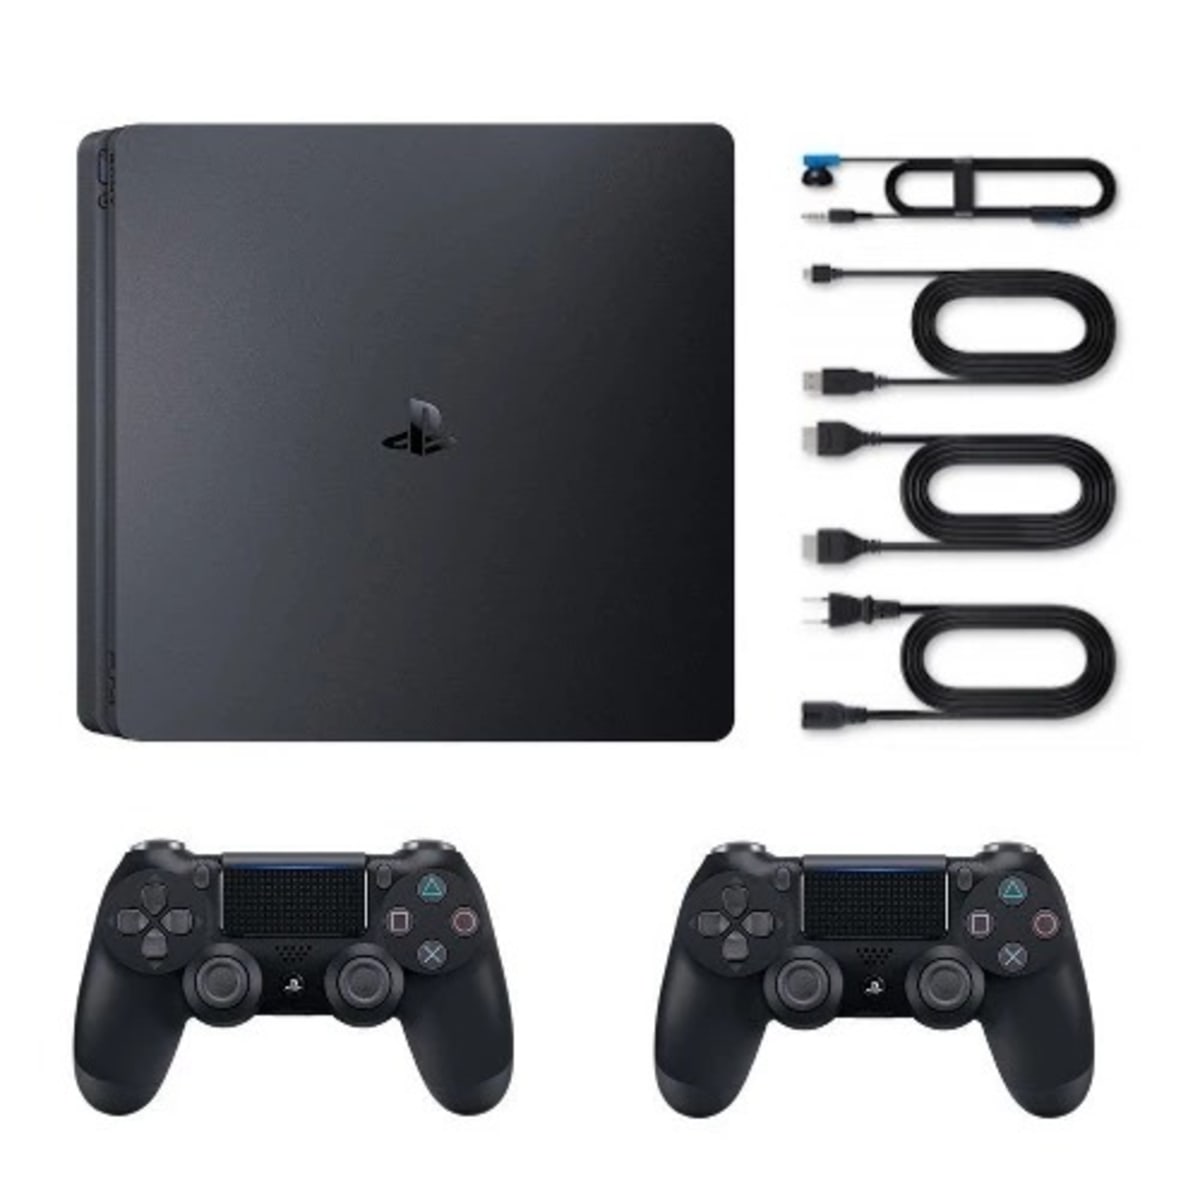 Sony PlayStation 4 Ps4 Slim 500GB Home Console System - Black